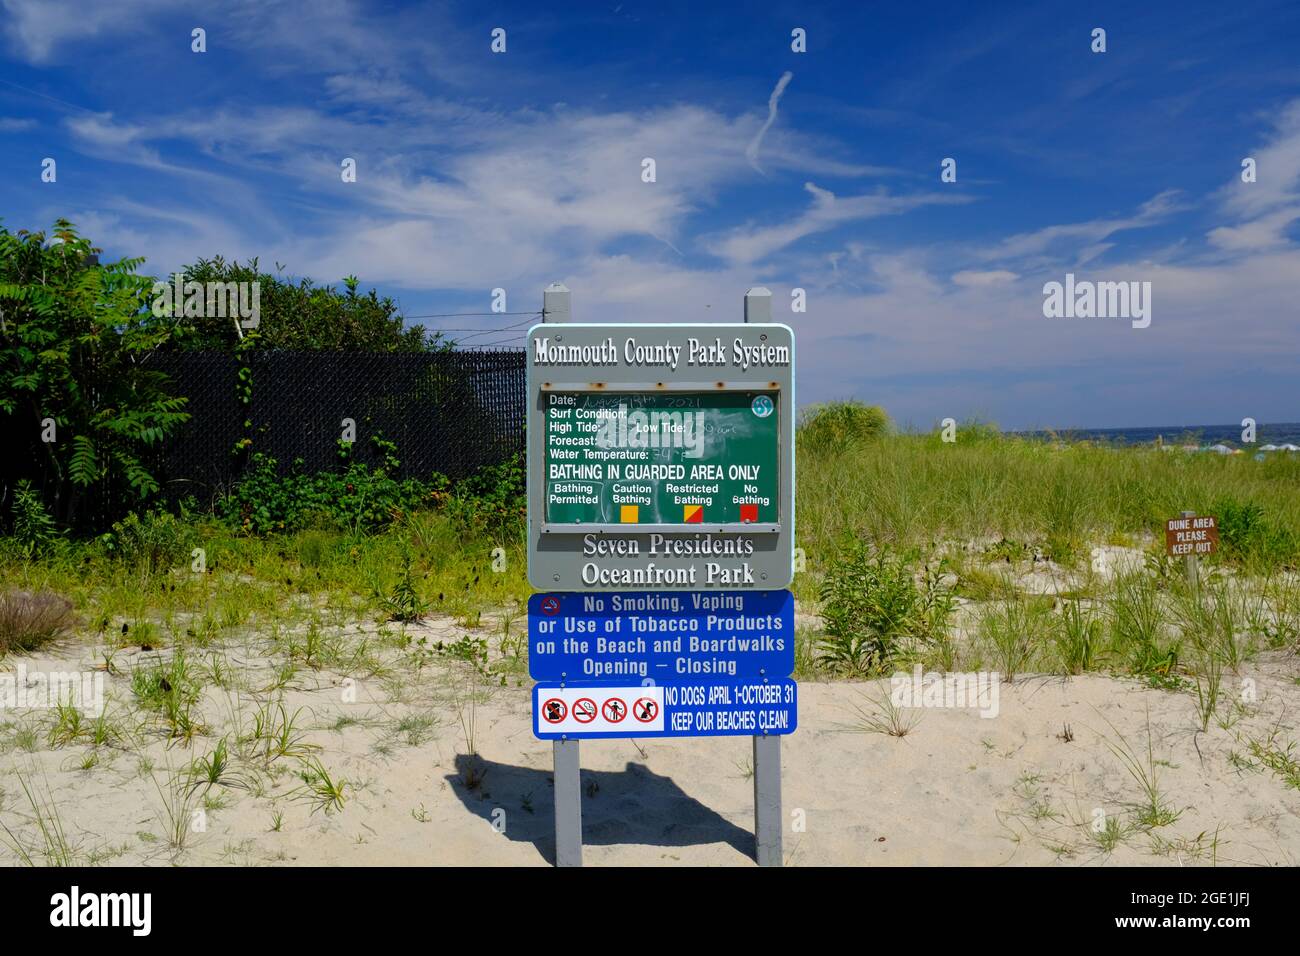 Eingangsschild für Seven Presidents Oceanfront Park, Monmouth County Park System, Long Branch, New Jersey Stockfoto